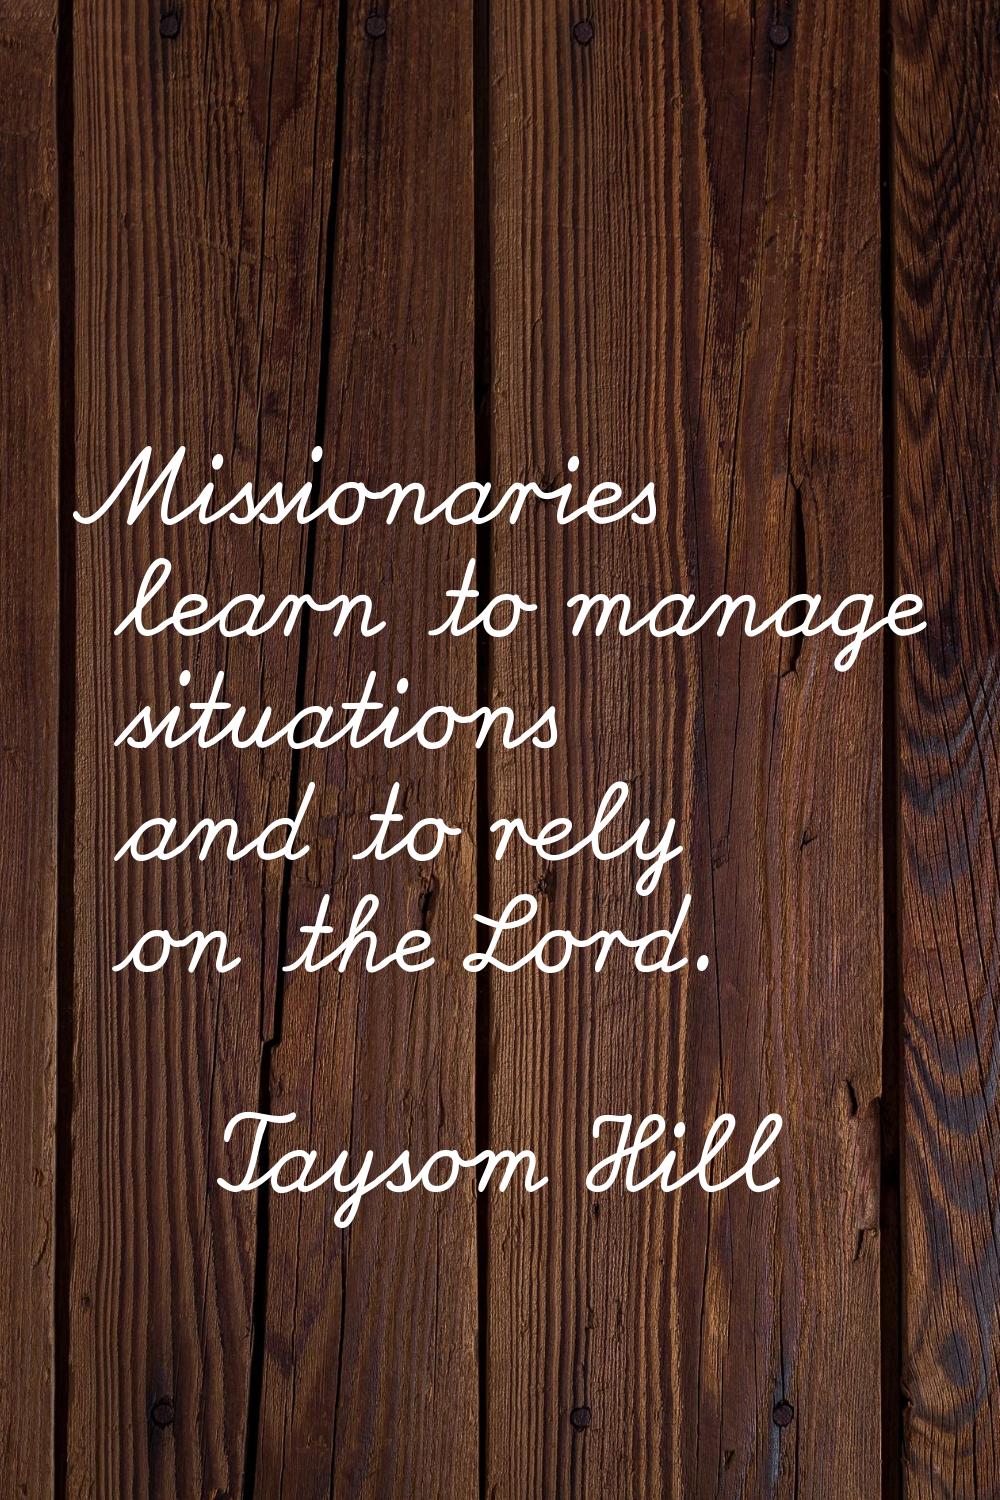 Missionaries learn to manage situations and to rely on the Lord.